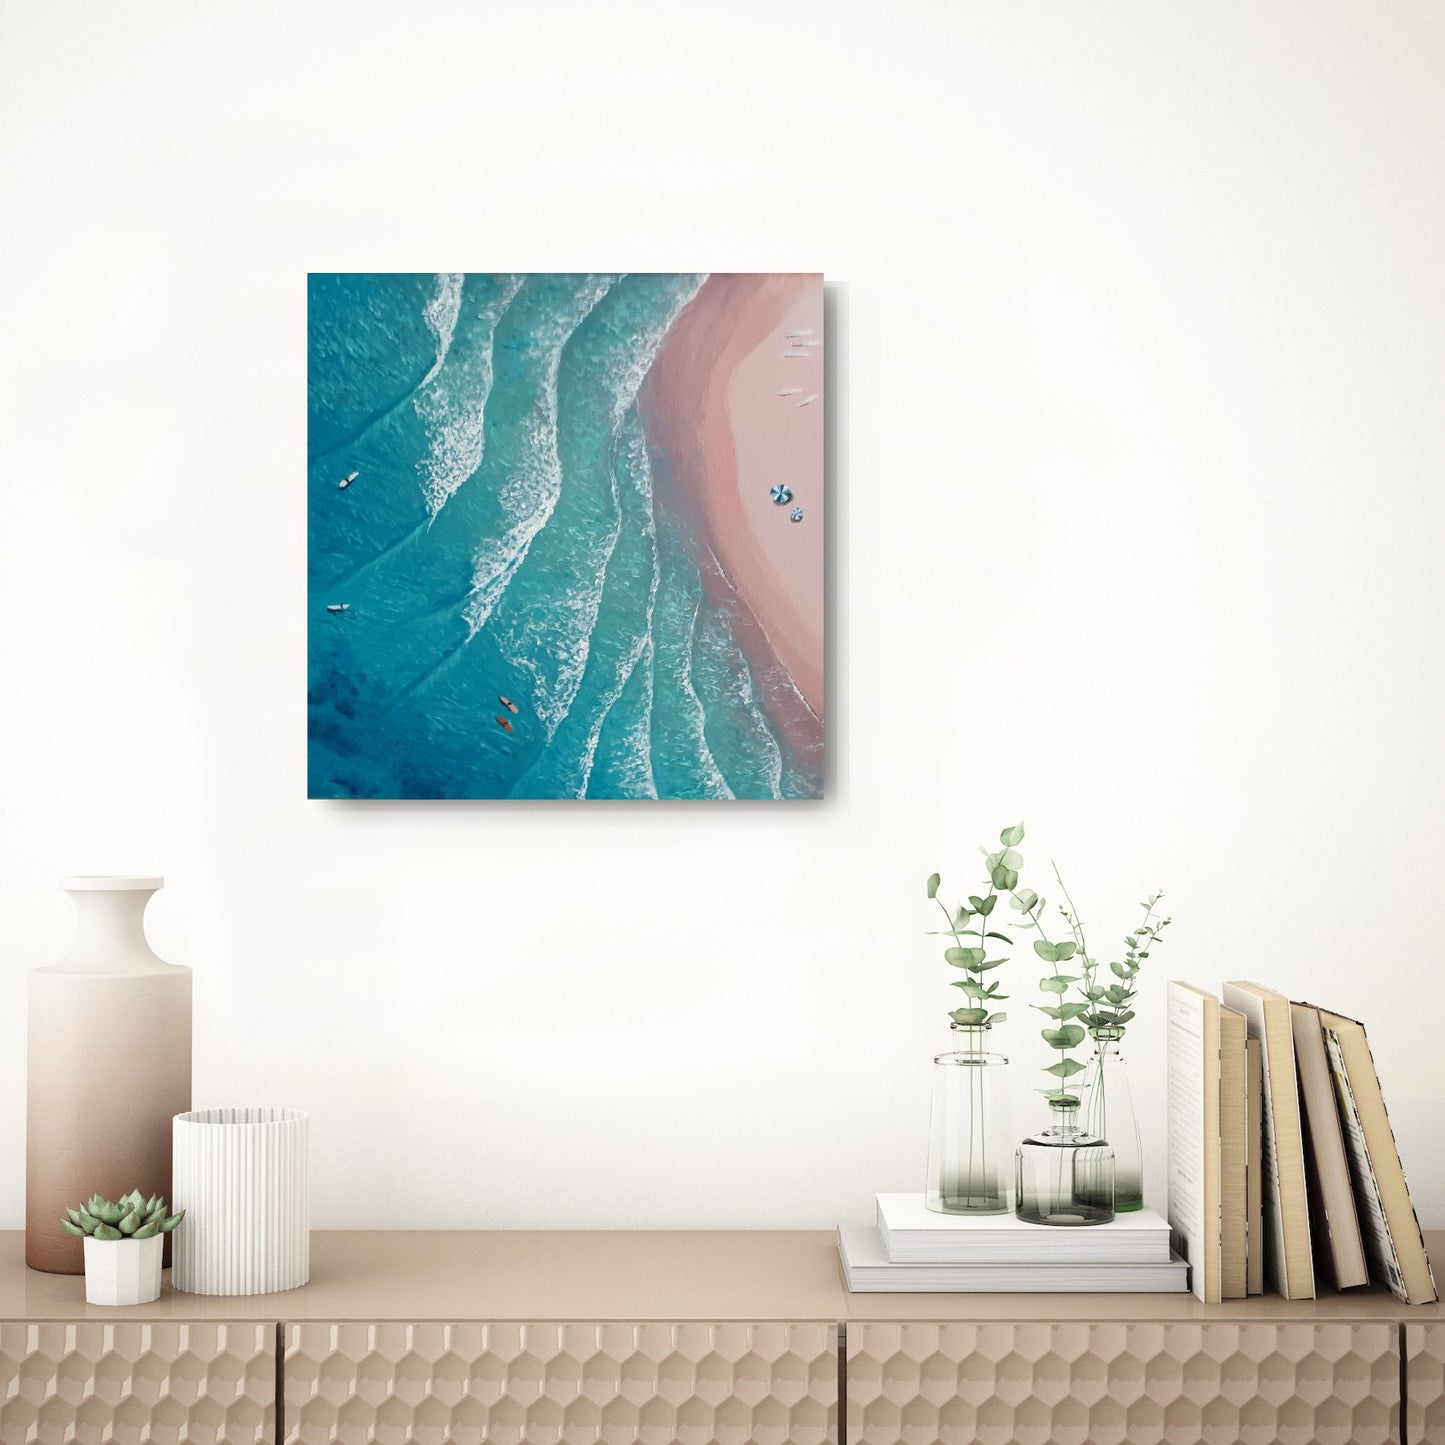 Surfers Paradise- An aerial view painting of pink sand beach and turquoise water hanging over an elegant wood table with a vase